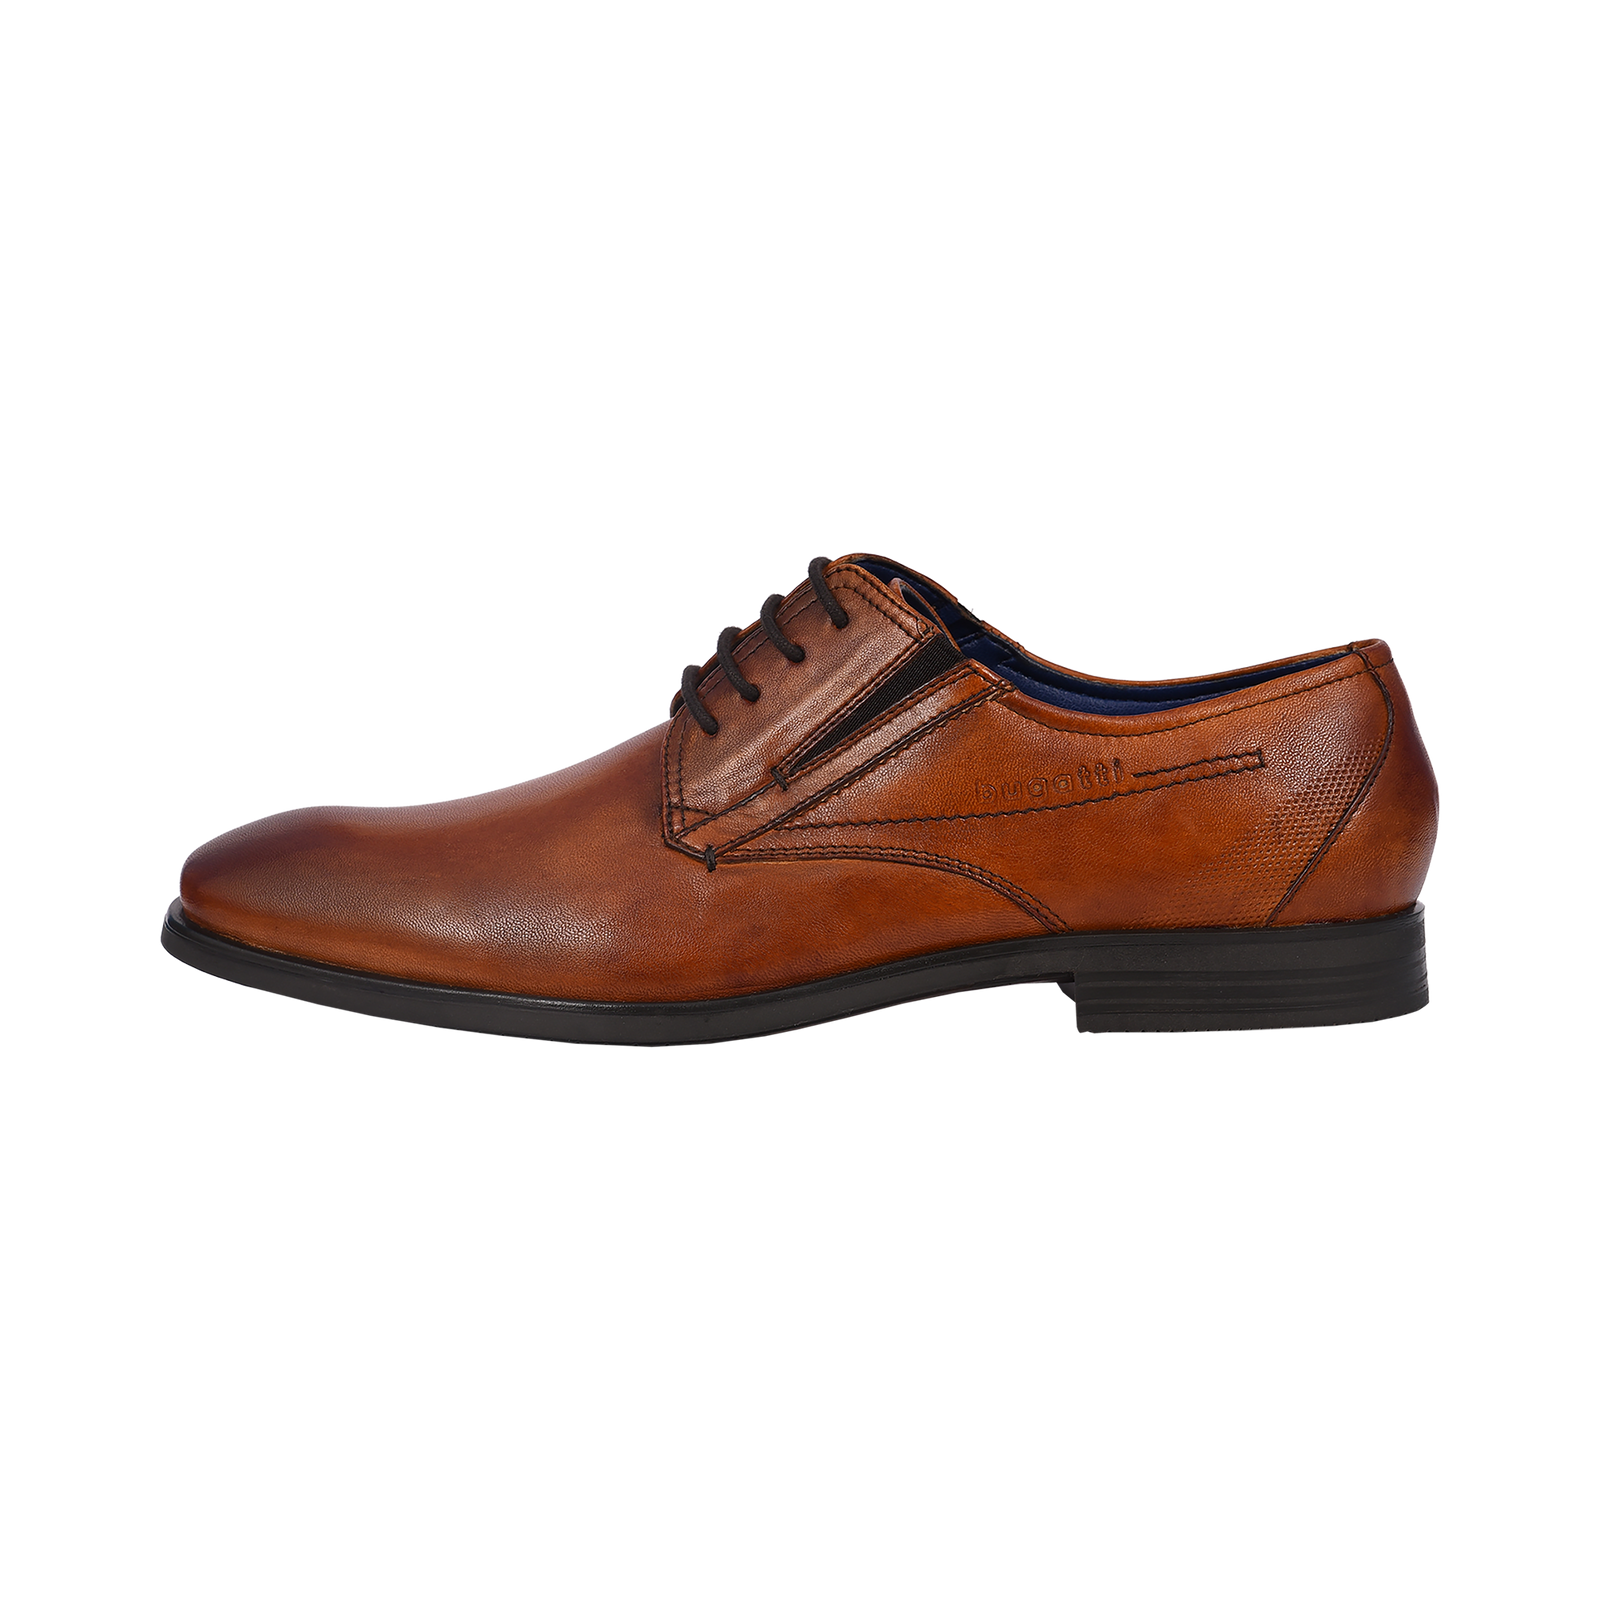     Front view of Bugatti cognac leather business shoes highlighting the spacious toe area.